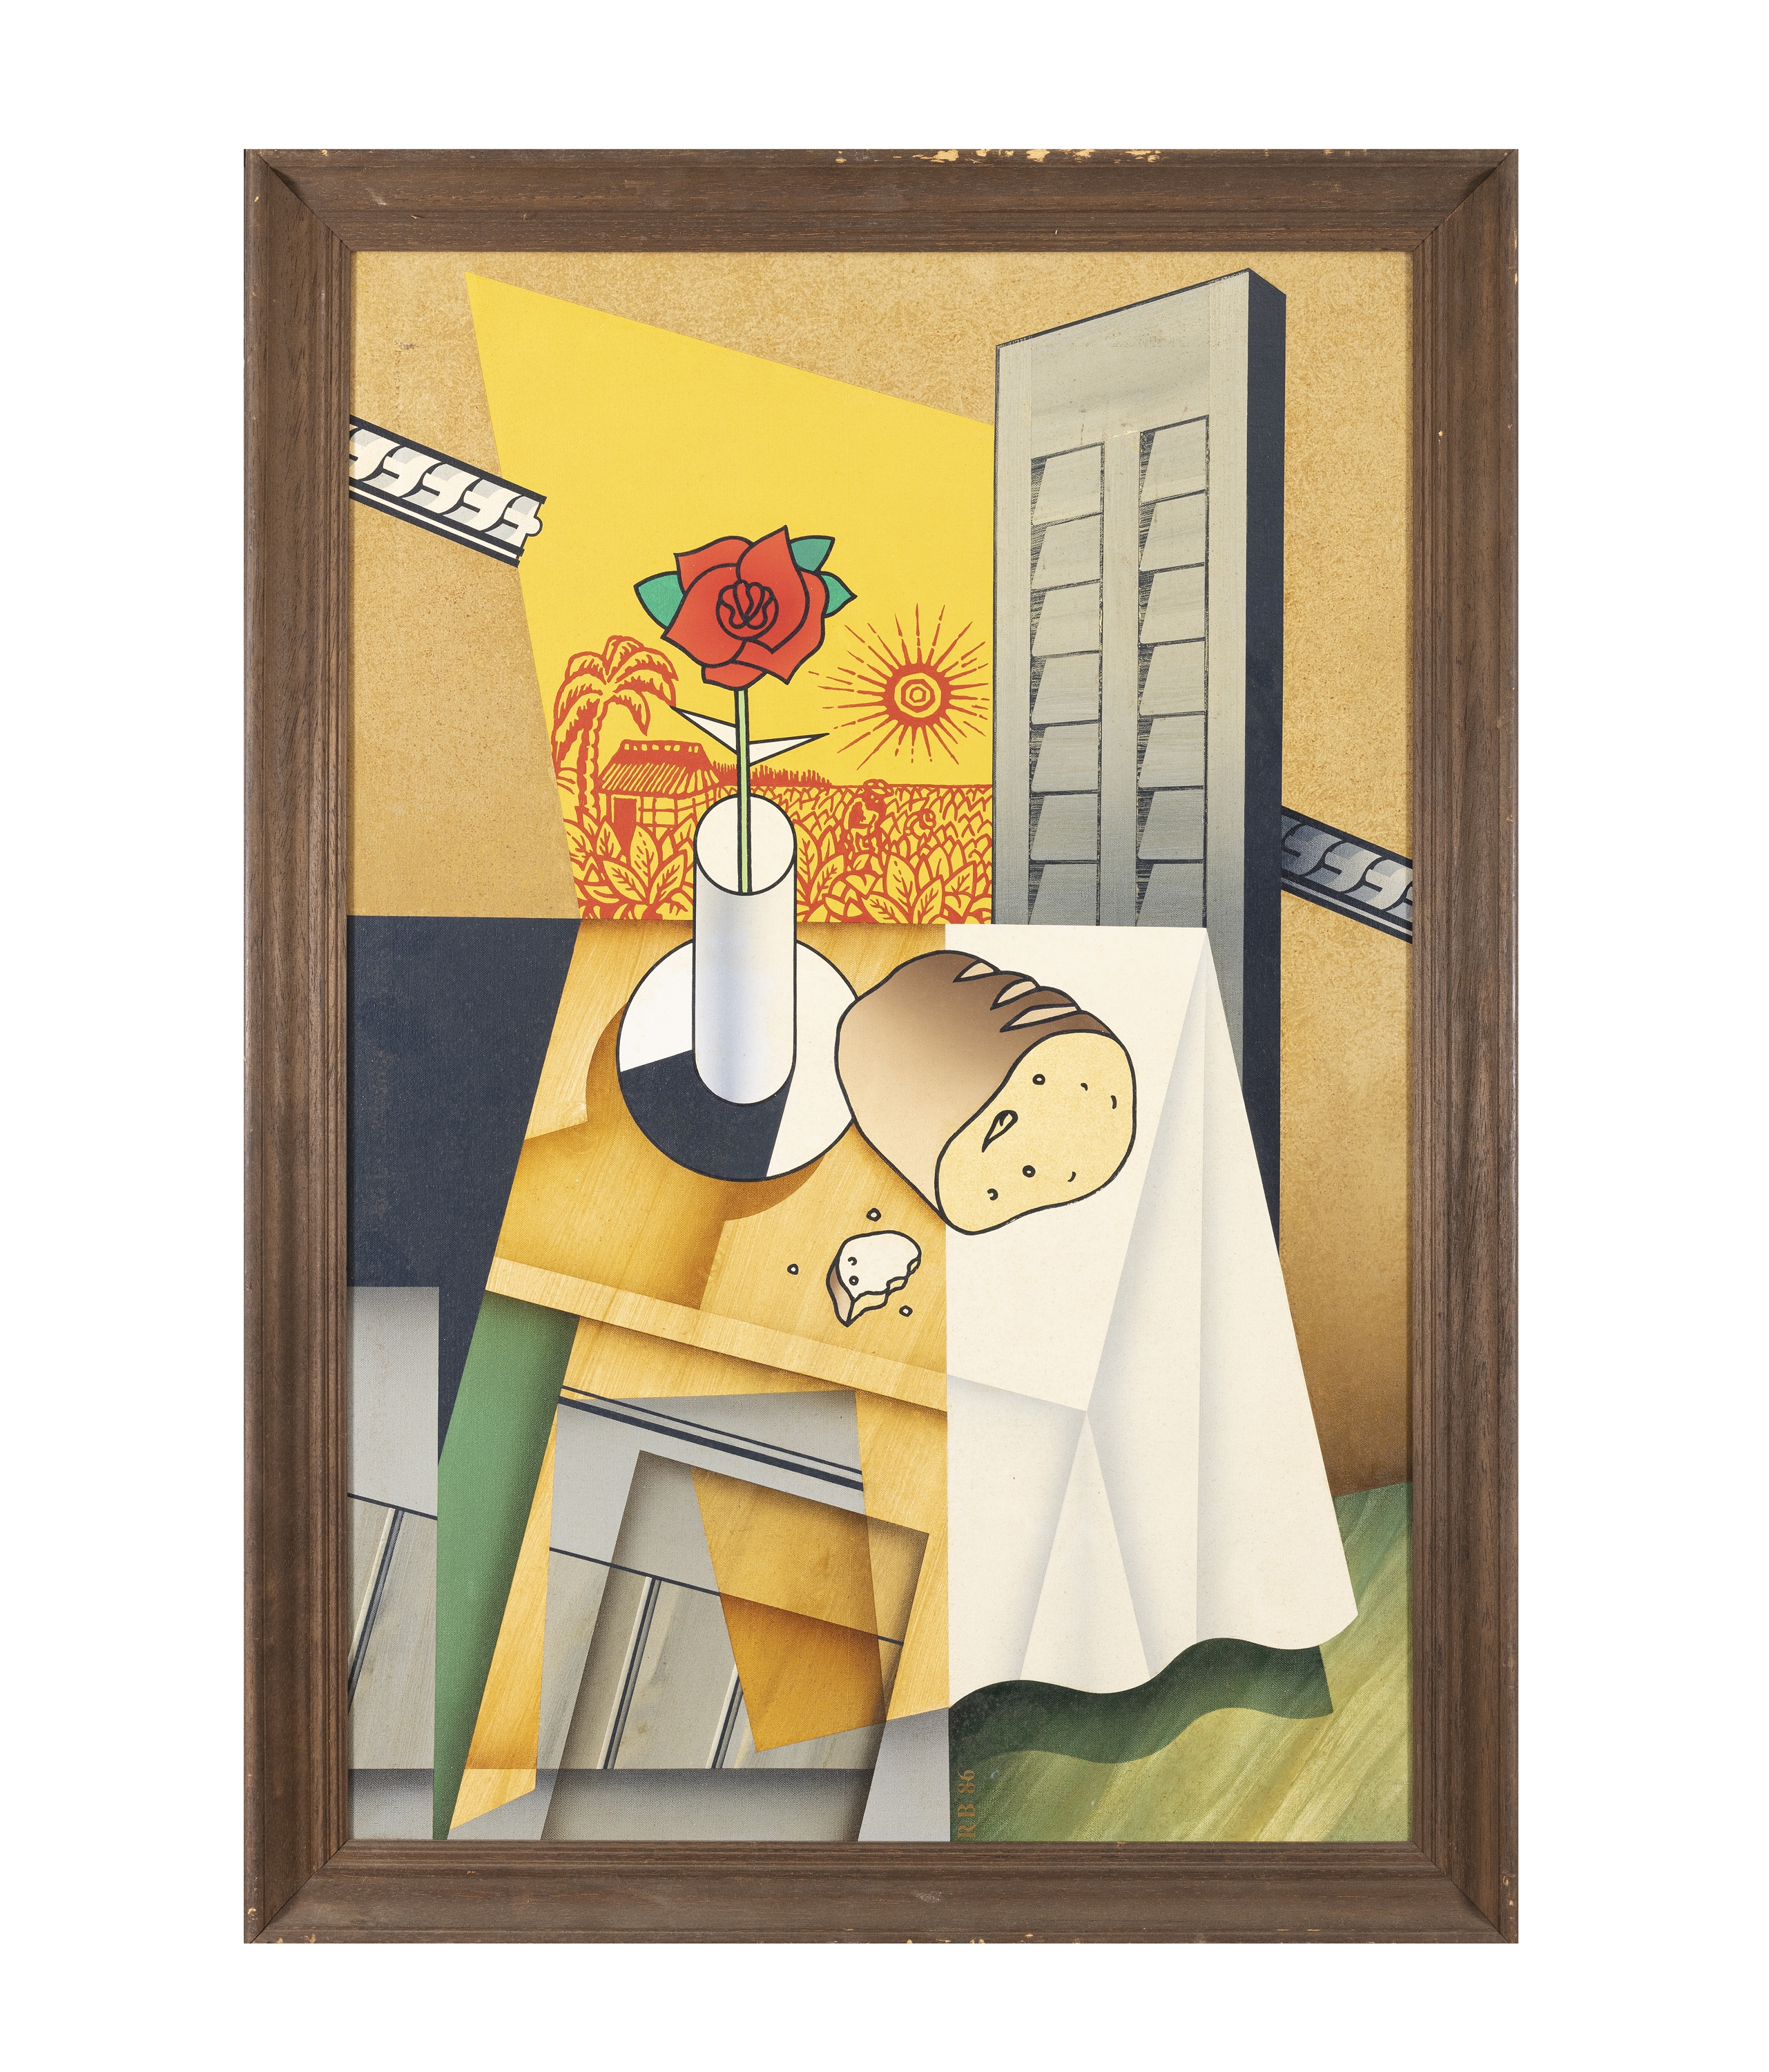 Artwork by Robert Ballagh, Still Life with Loaf and Rose, Made of Acrylic on board